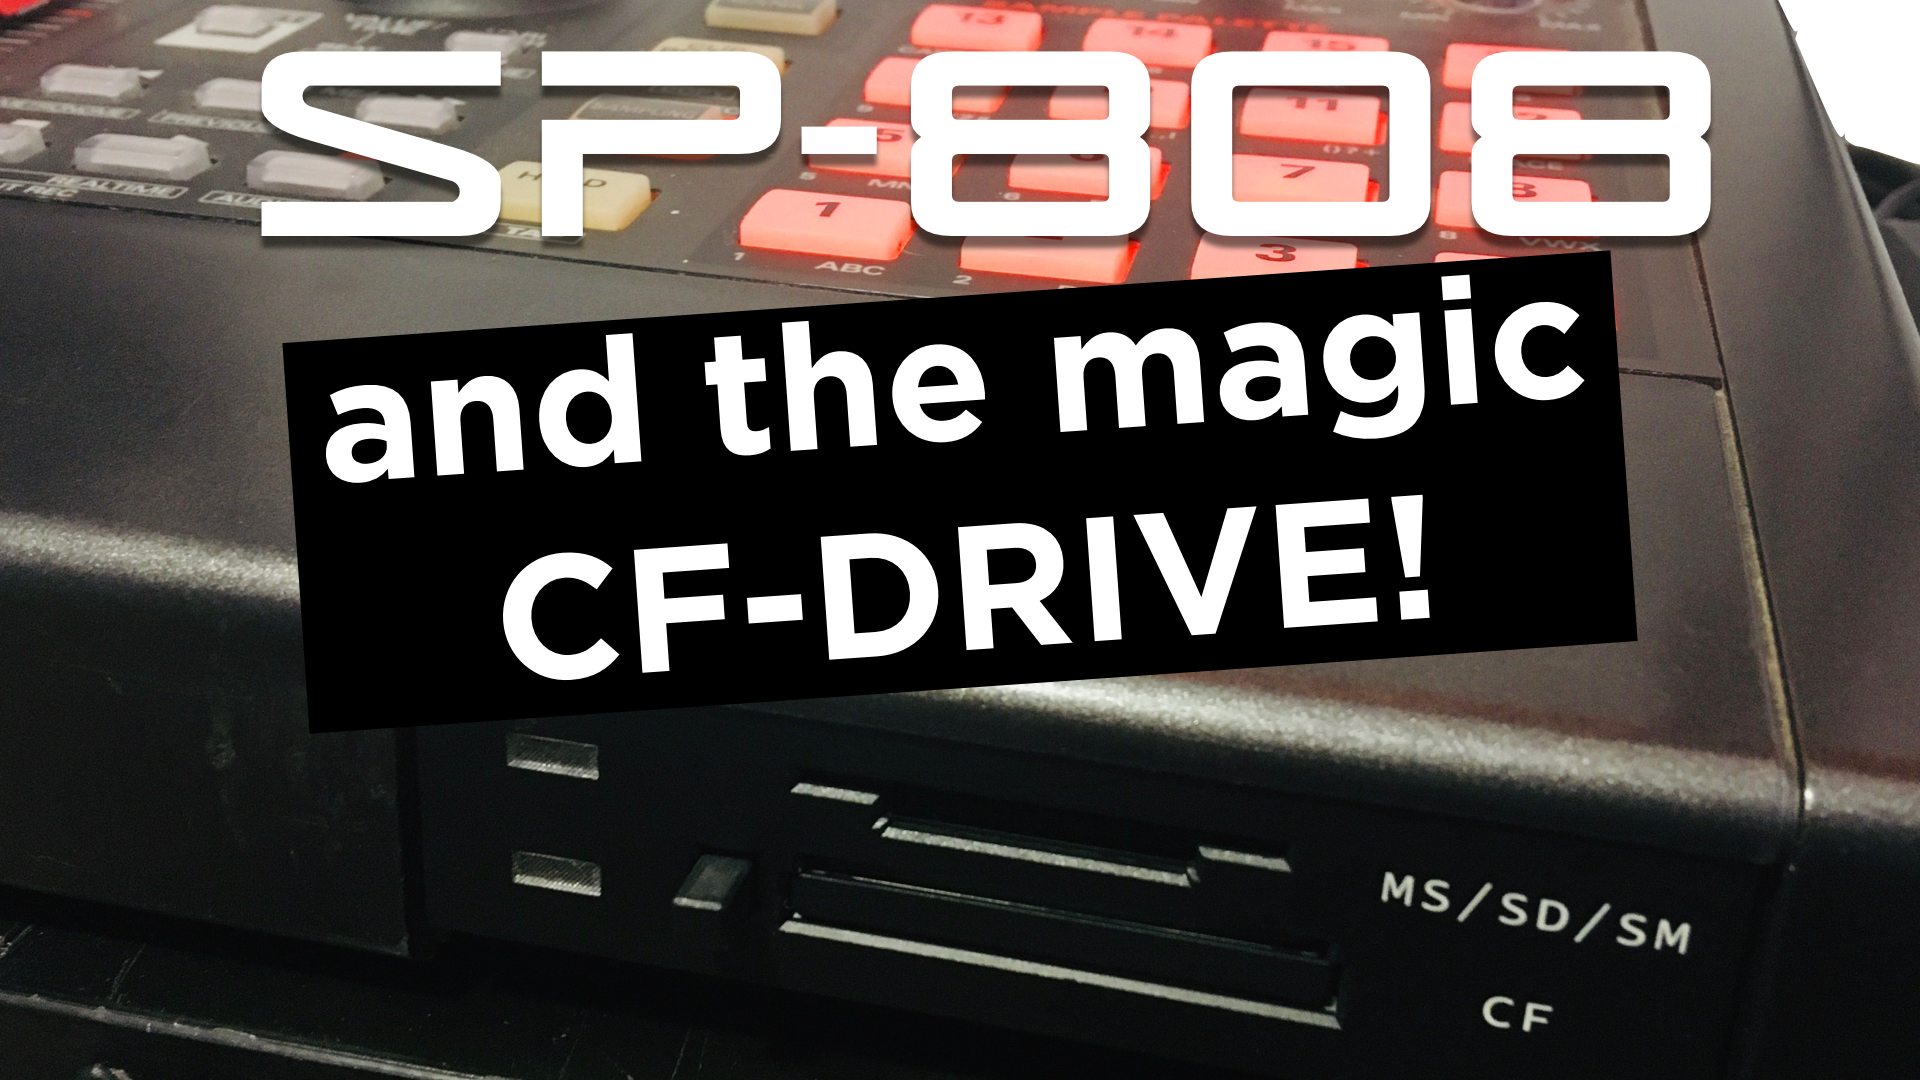 SP-808 and the magic CF-Drive